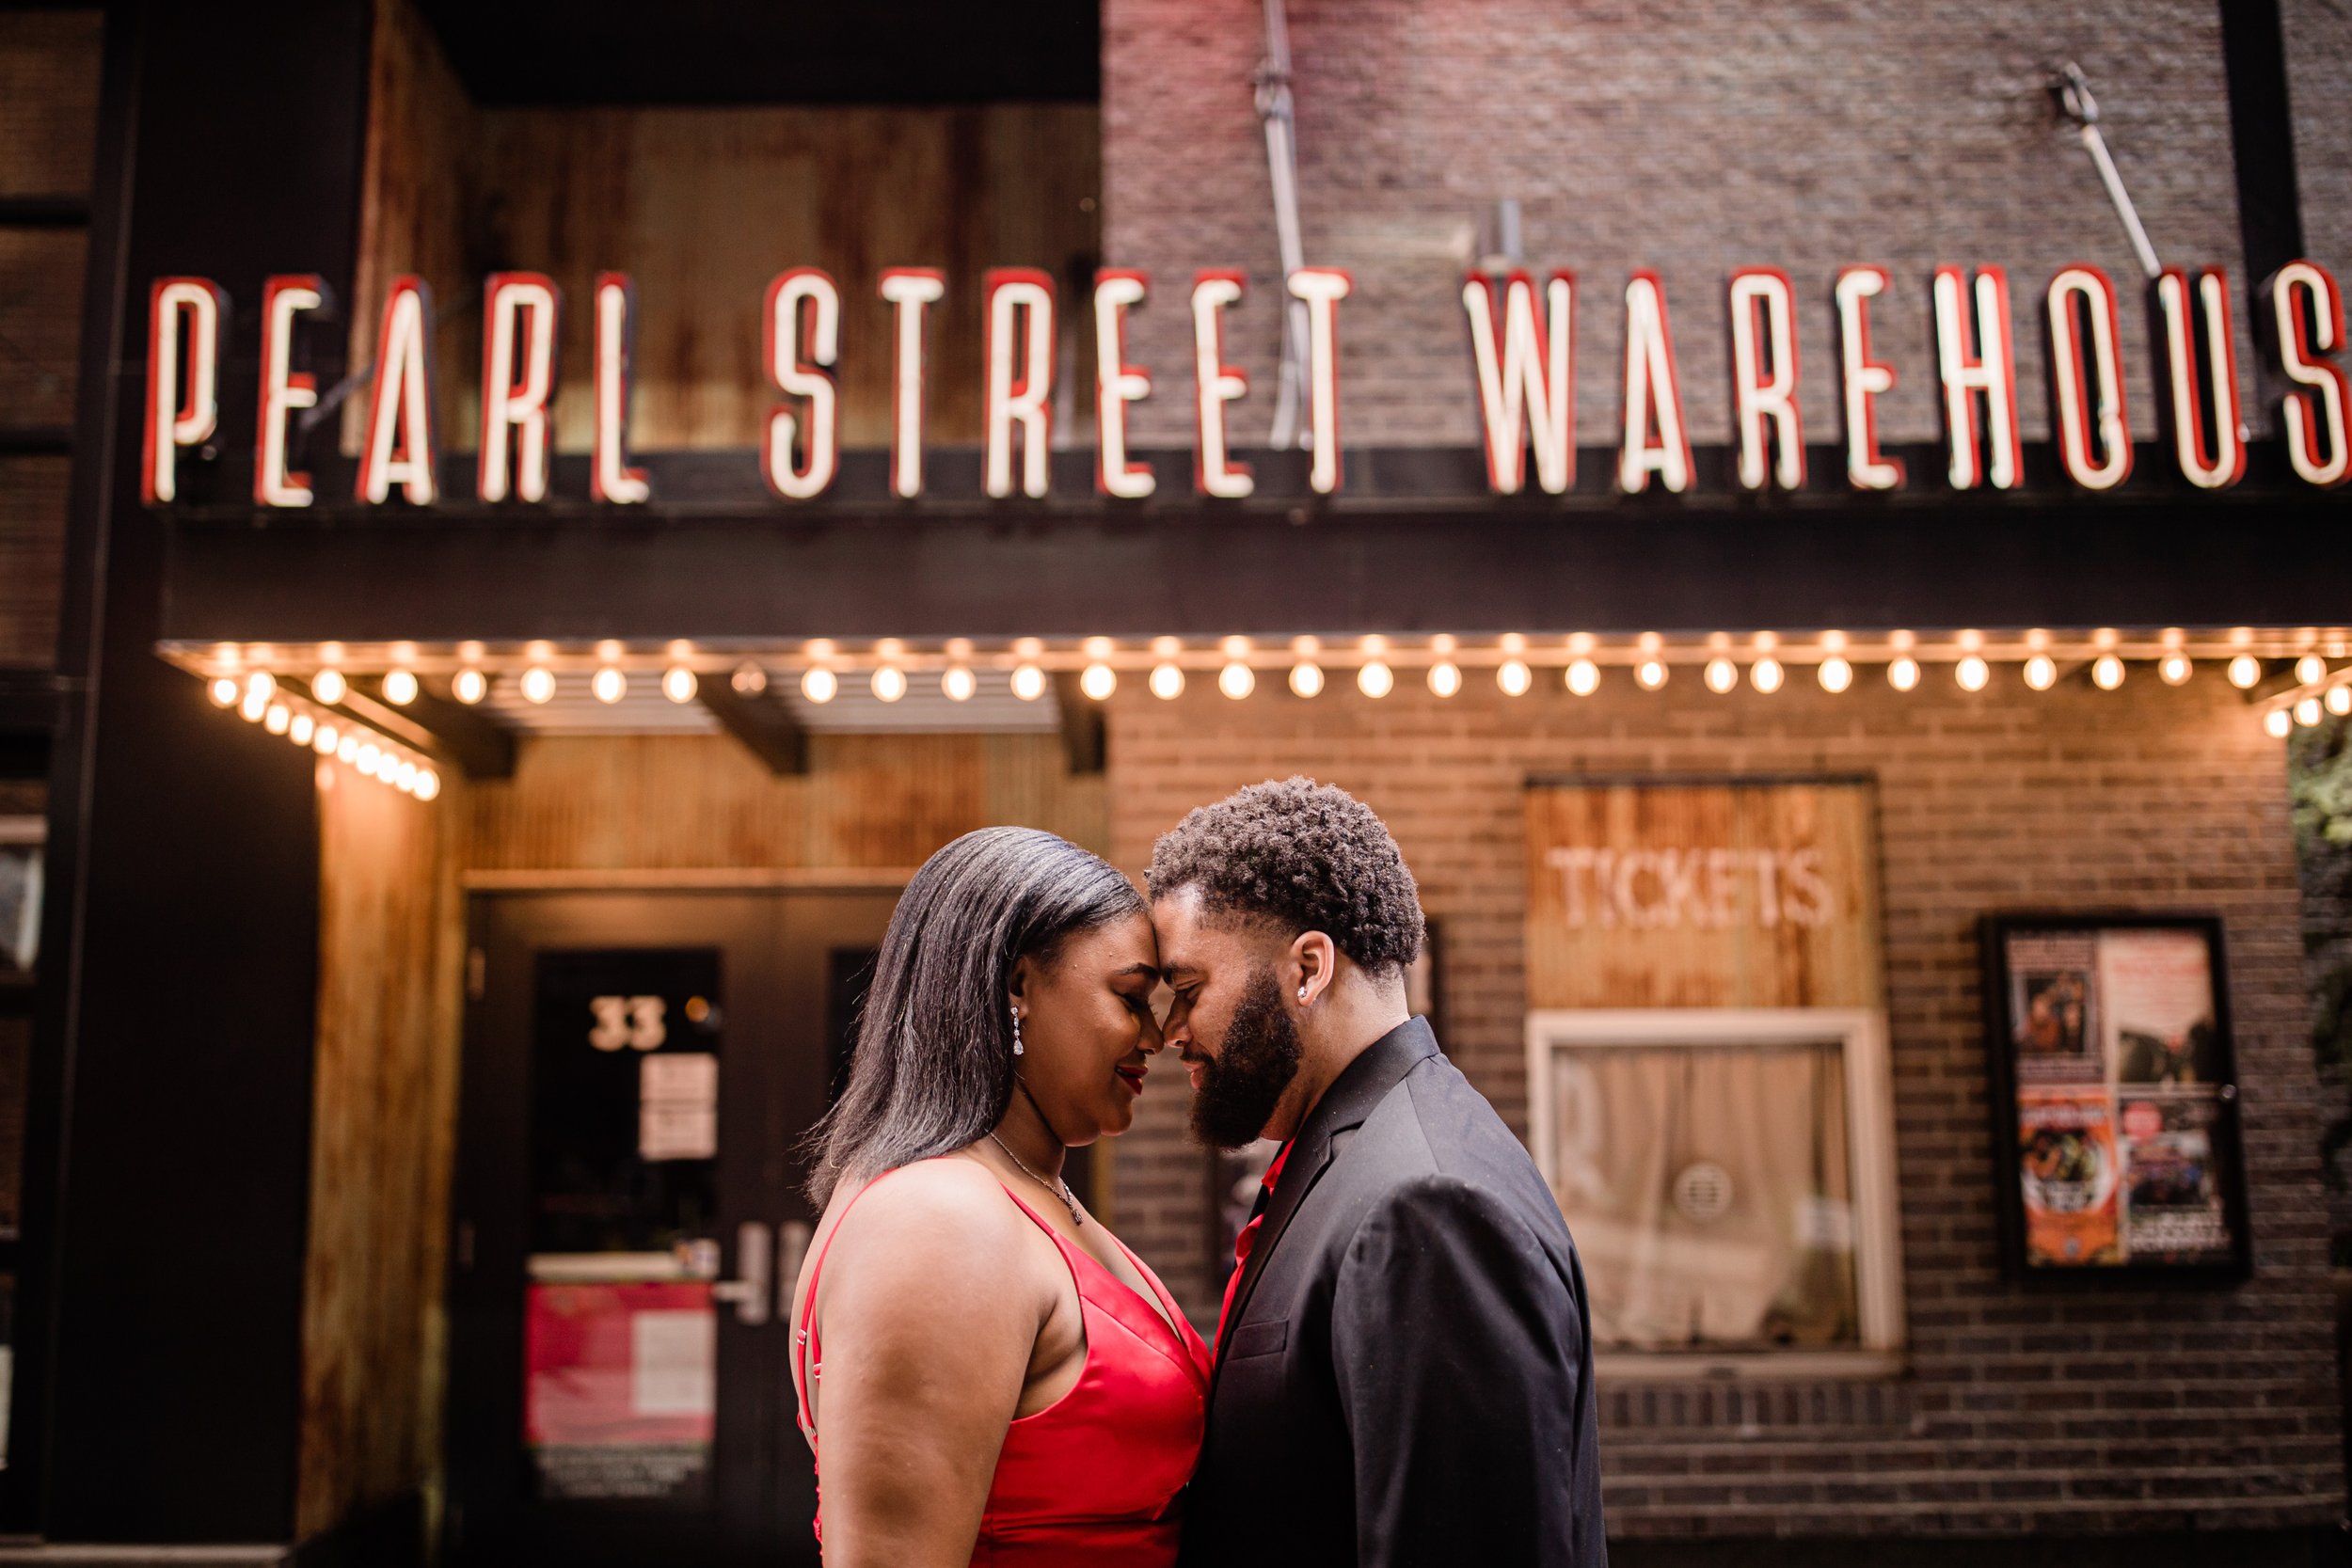 The Wharf in DC Pearl Street Warehouse Engagment Photography Megapixels Media-17.jpg